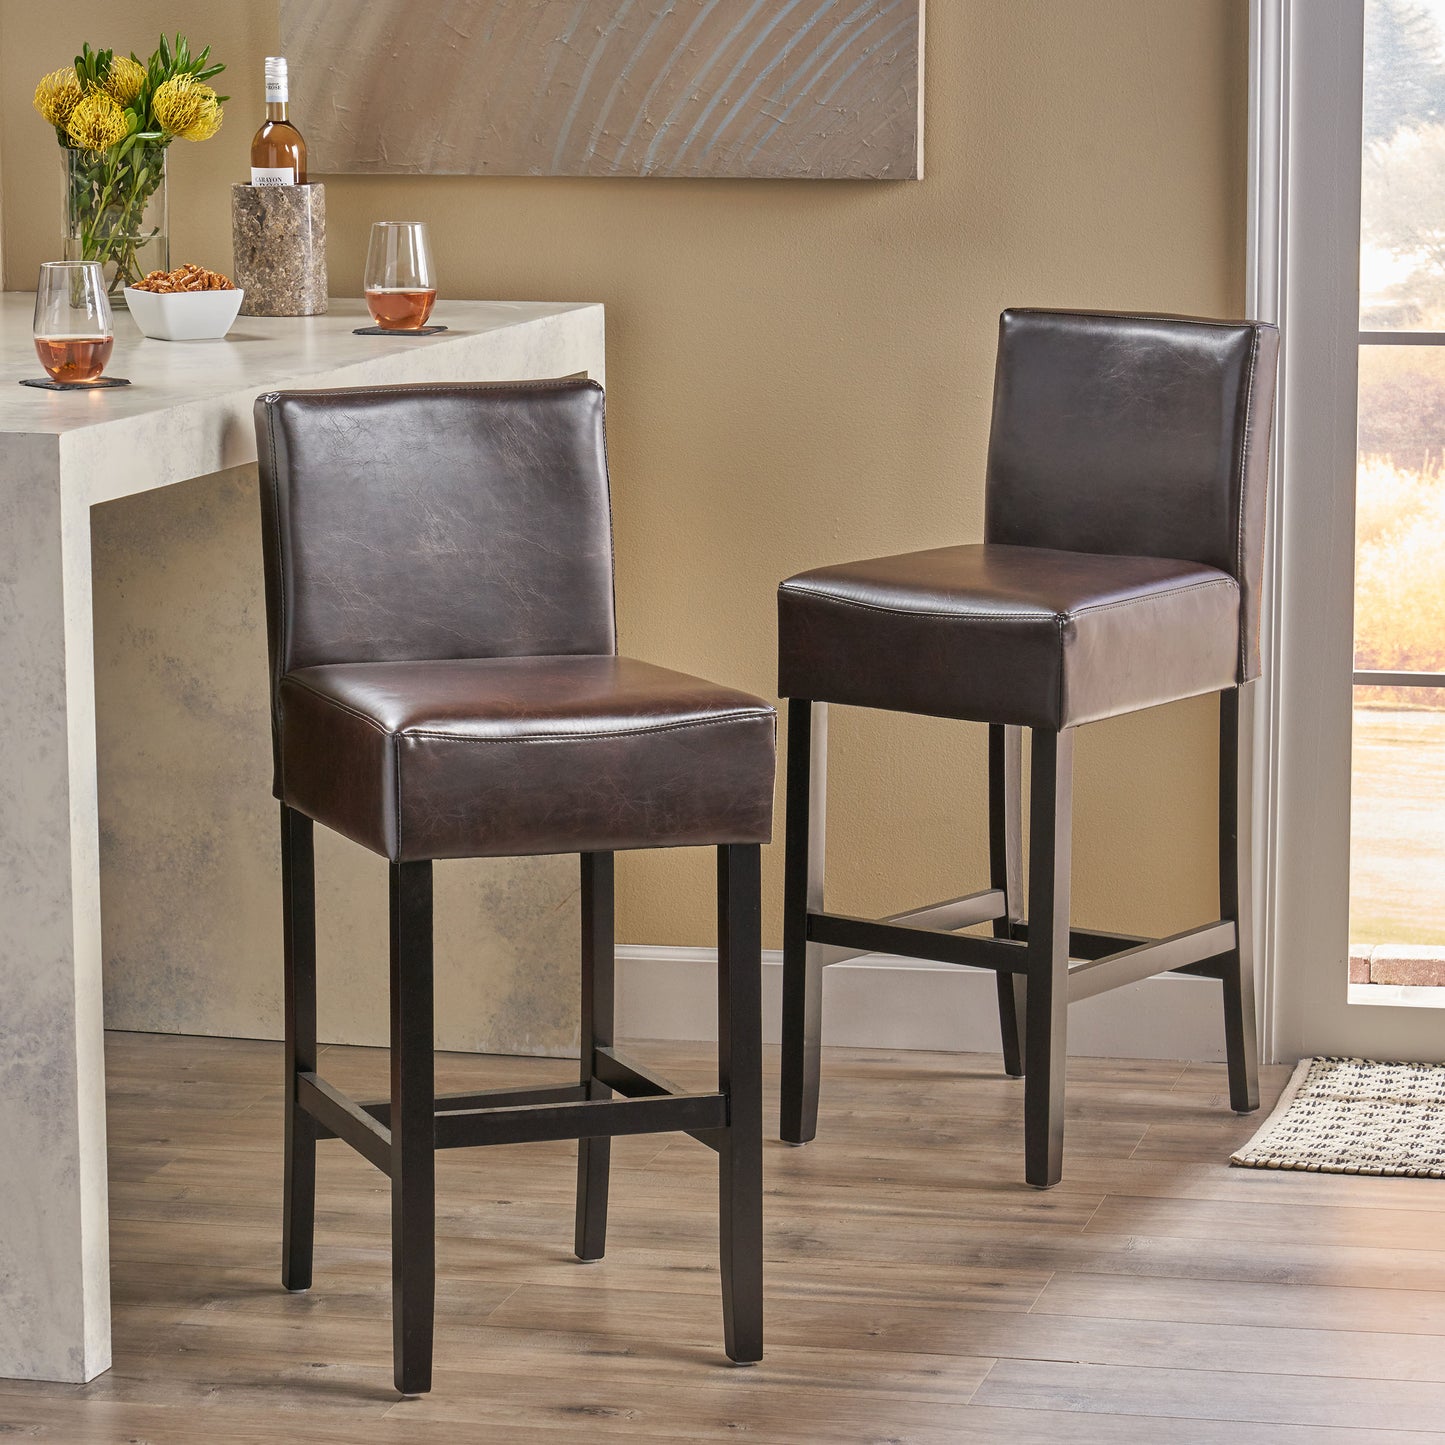 Lowry Contemporary Upholstered Ivory Bonded Leather Backed Barstools (Set of 2)